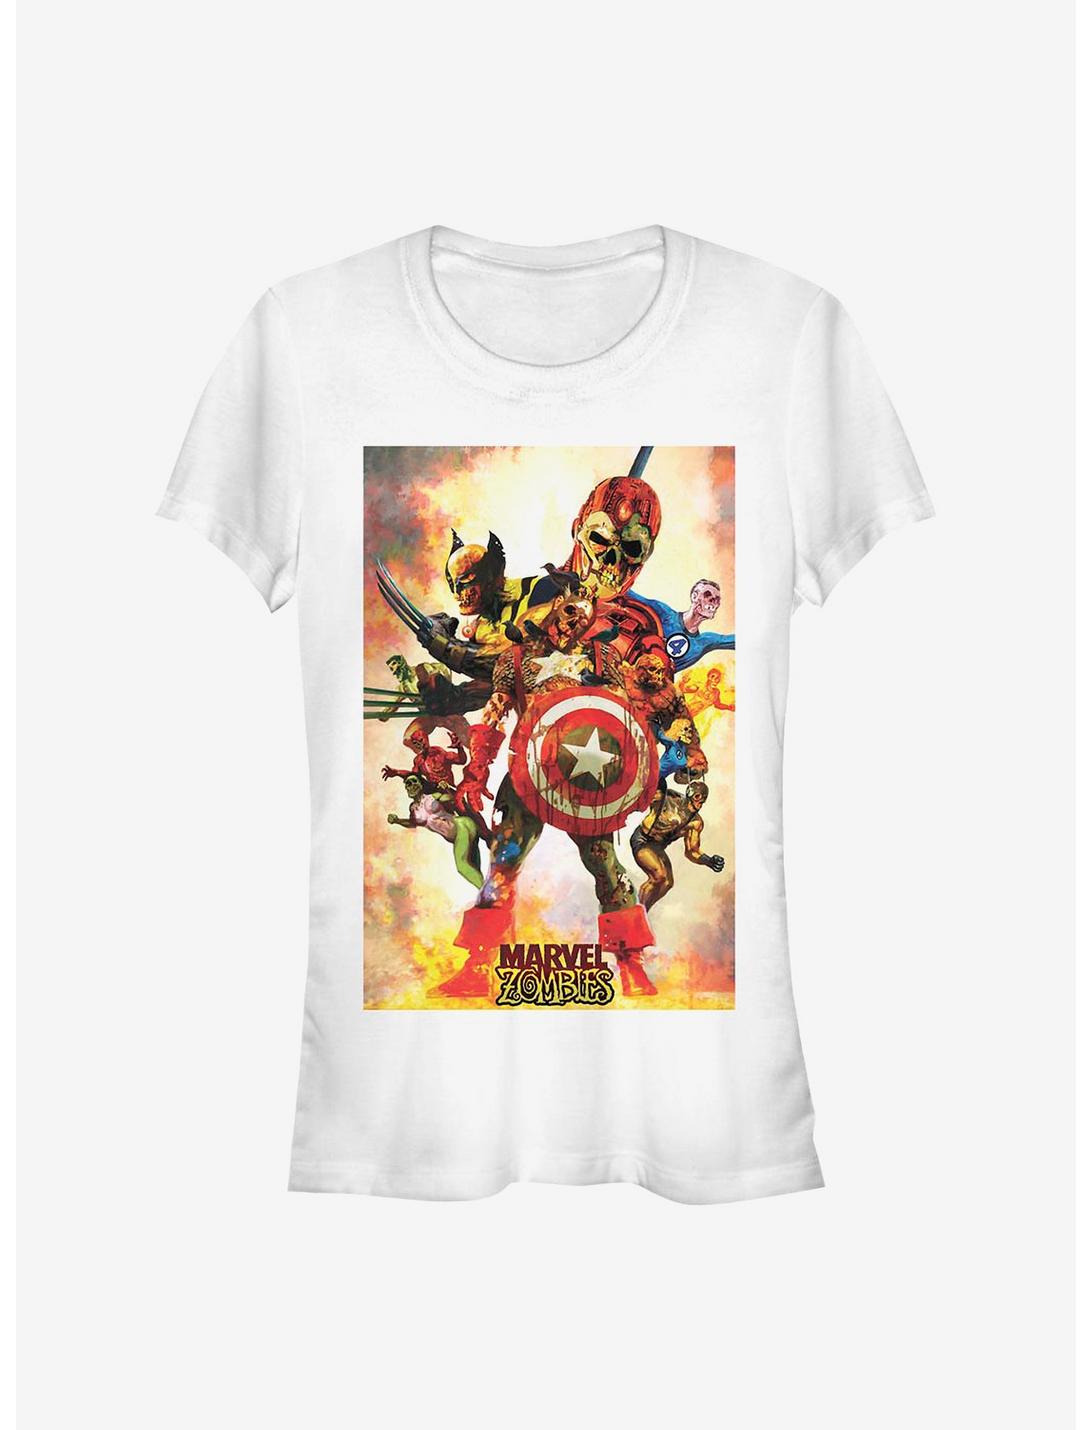 Marvel Zombies Zombie Poster Girls T-Shirt, BLACK, hi-res